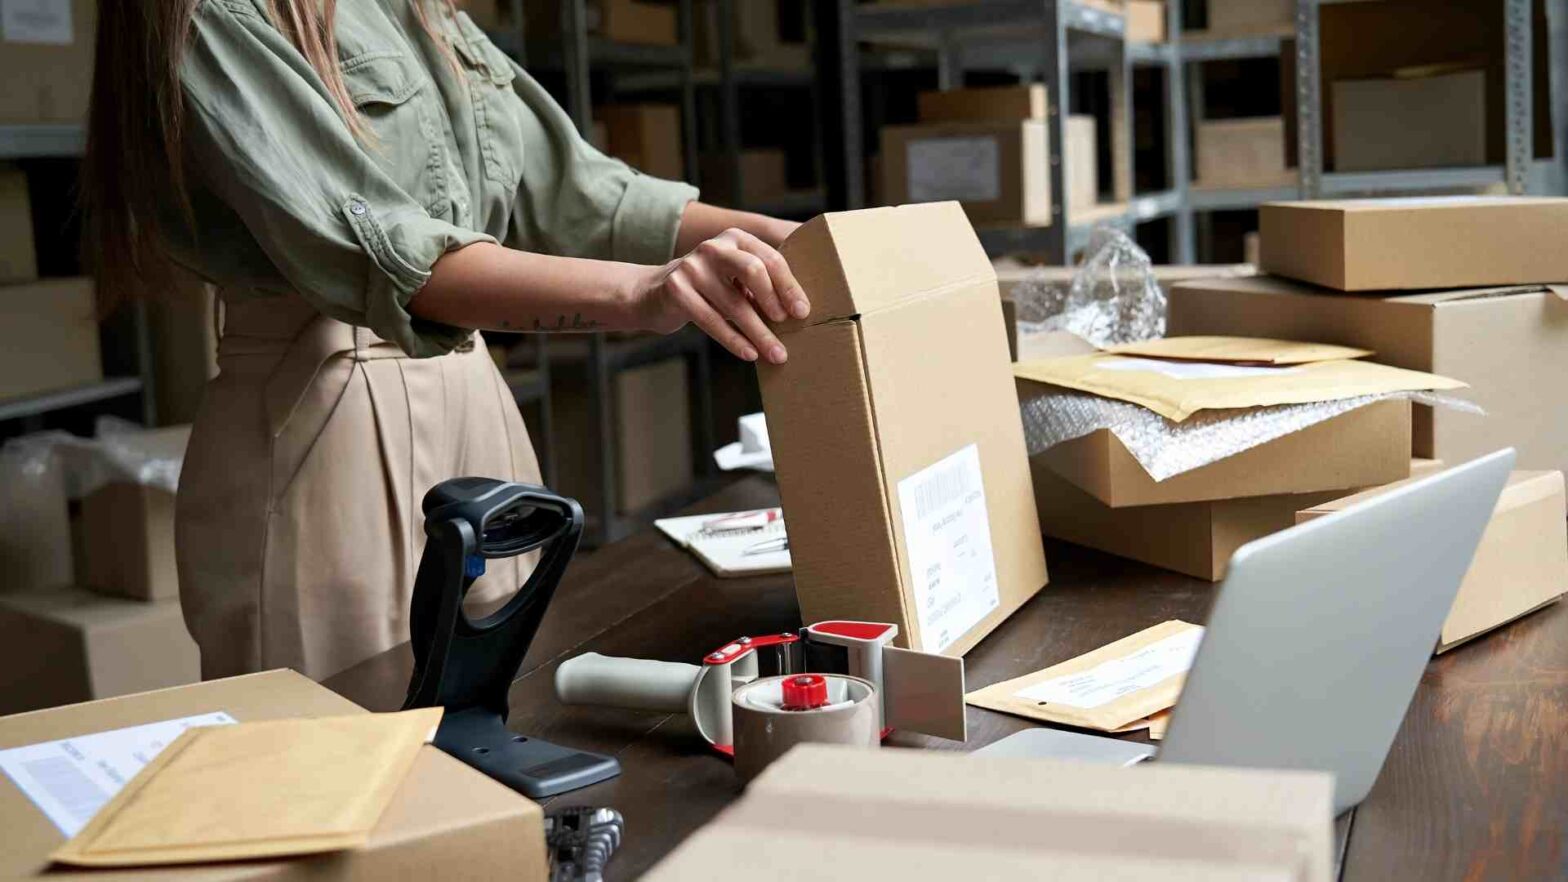 Female packing ecommerce orders, Best Parcel Forwarding Service USA, Parcel Forwarding Services, Kimbo Online Store